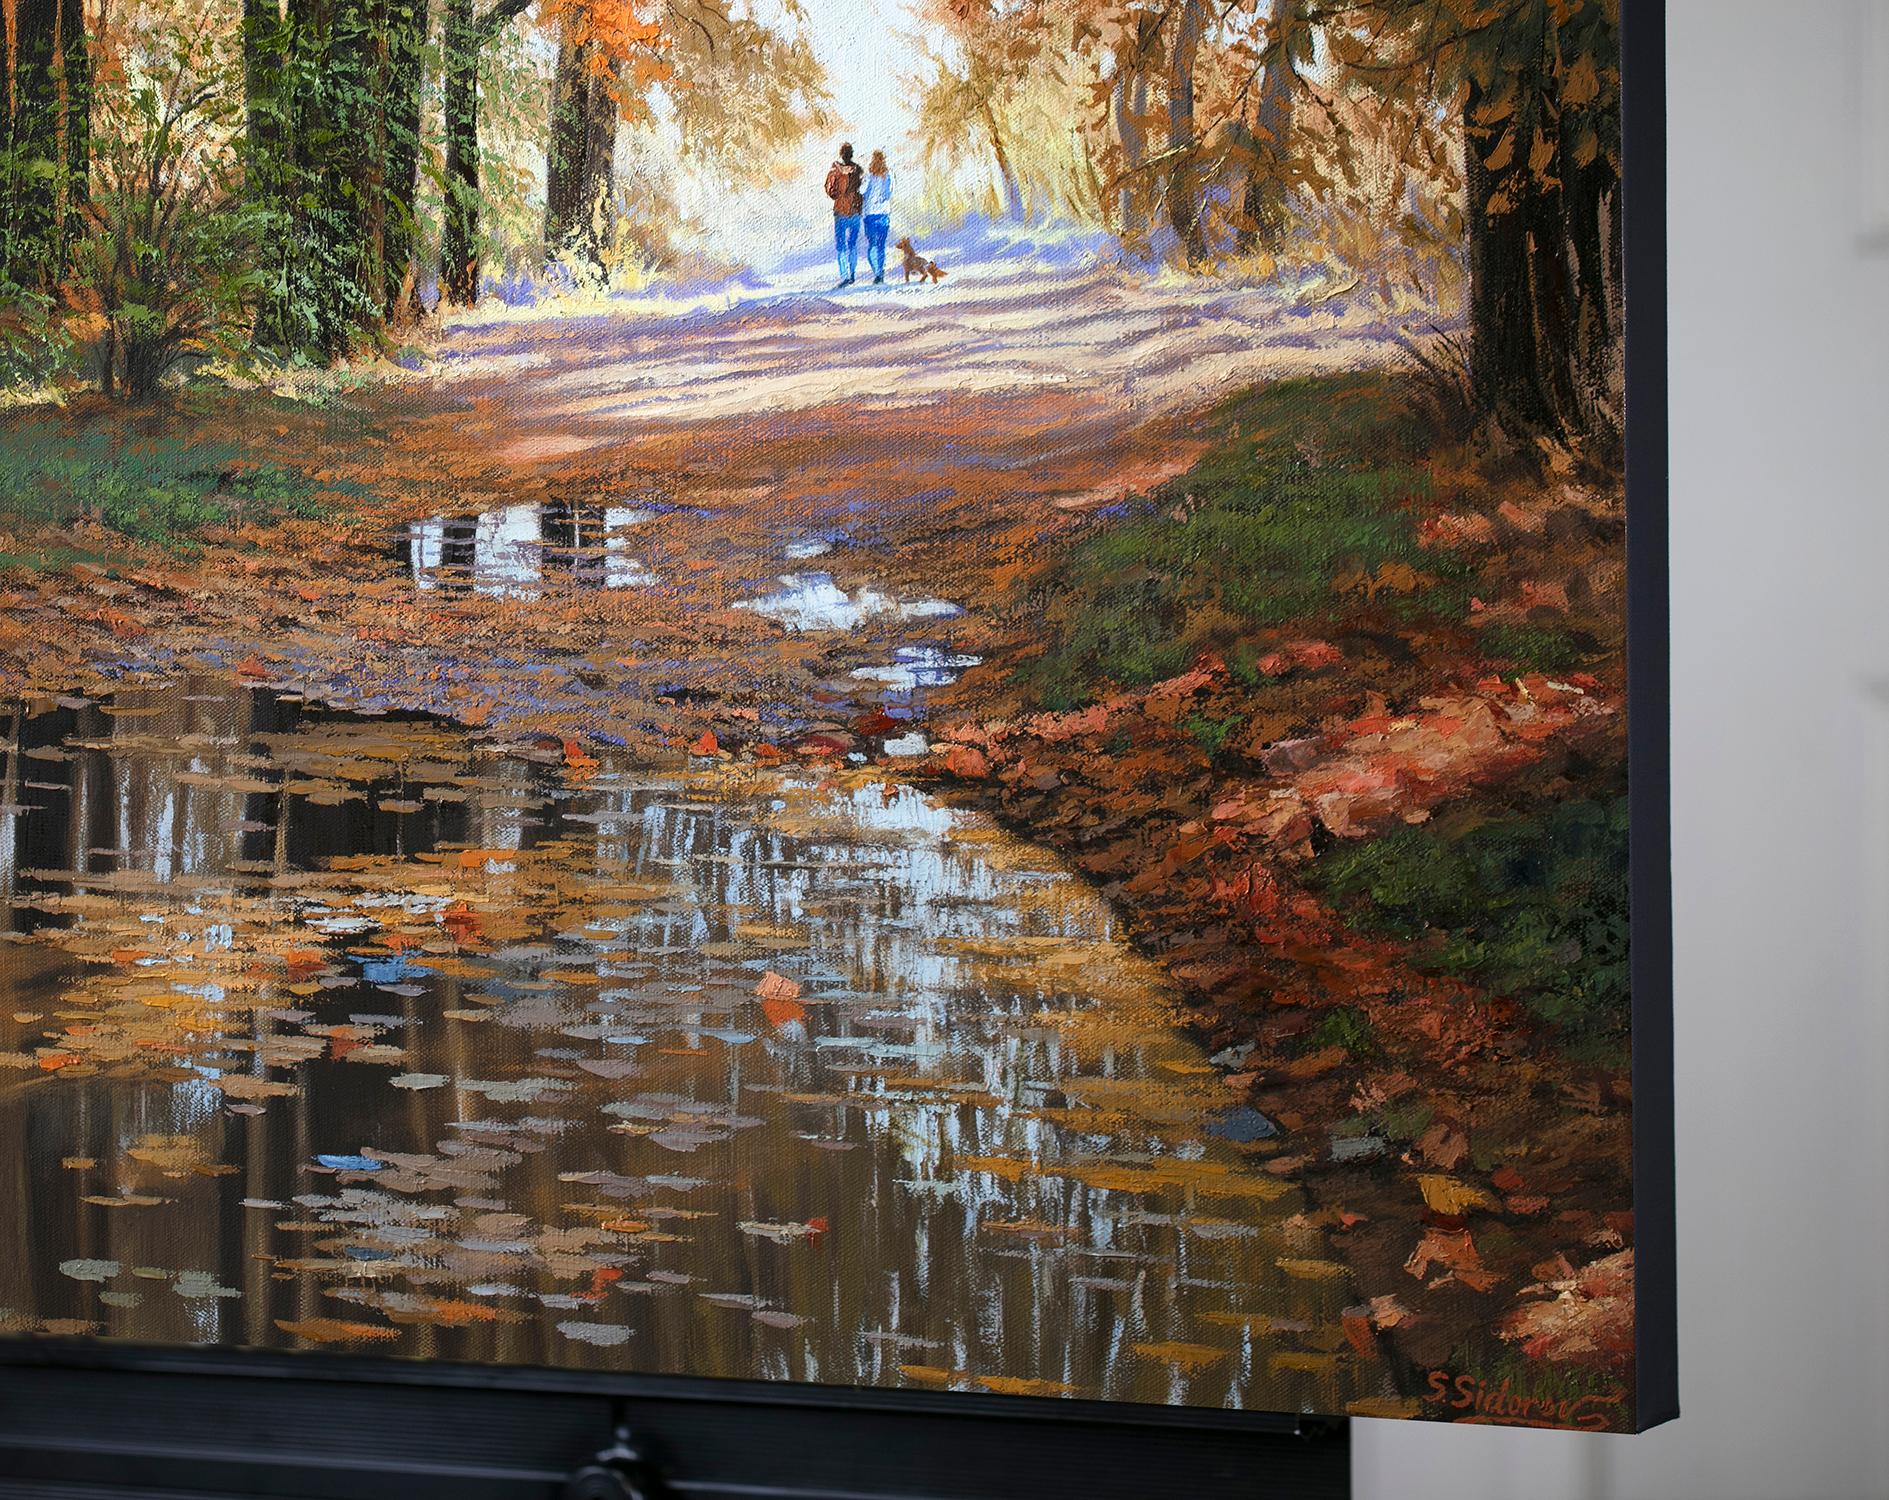 <p>Artist Comments<br>A couple takes a peaceful stroll with their dog through a shaded road in the woods. Layers of vibrant, warm hues convey the spirit of autumn transformation. Expressive strokes capture the dynamic energy of the season, while the